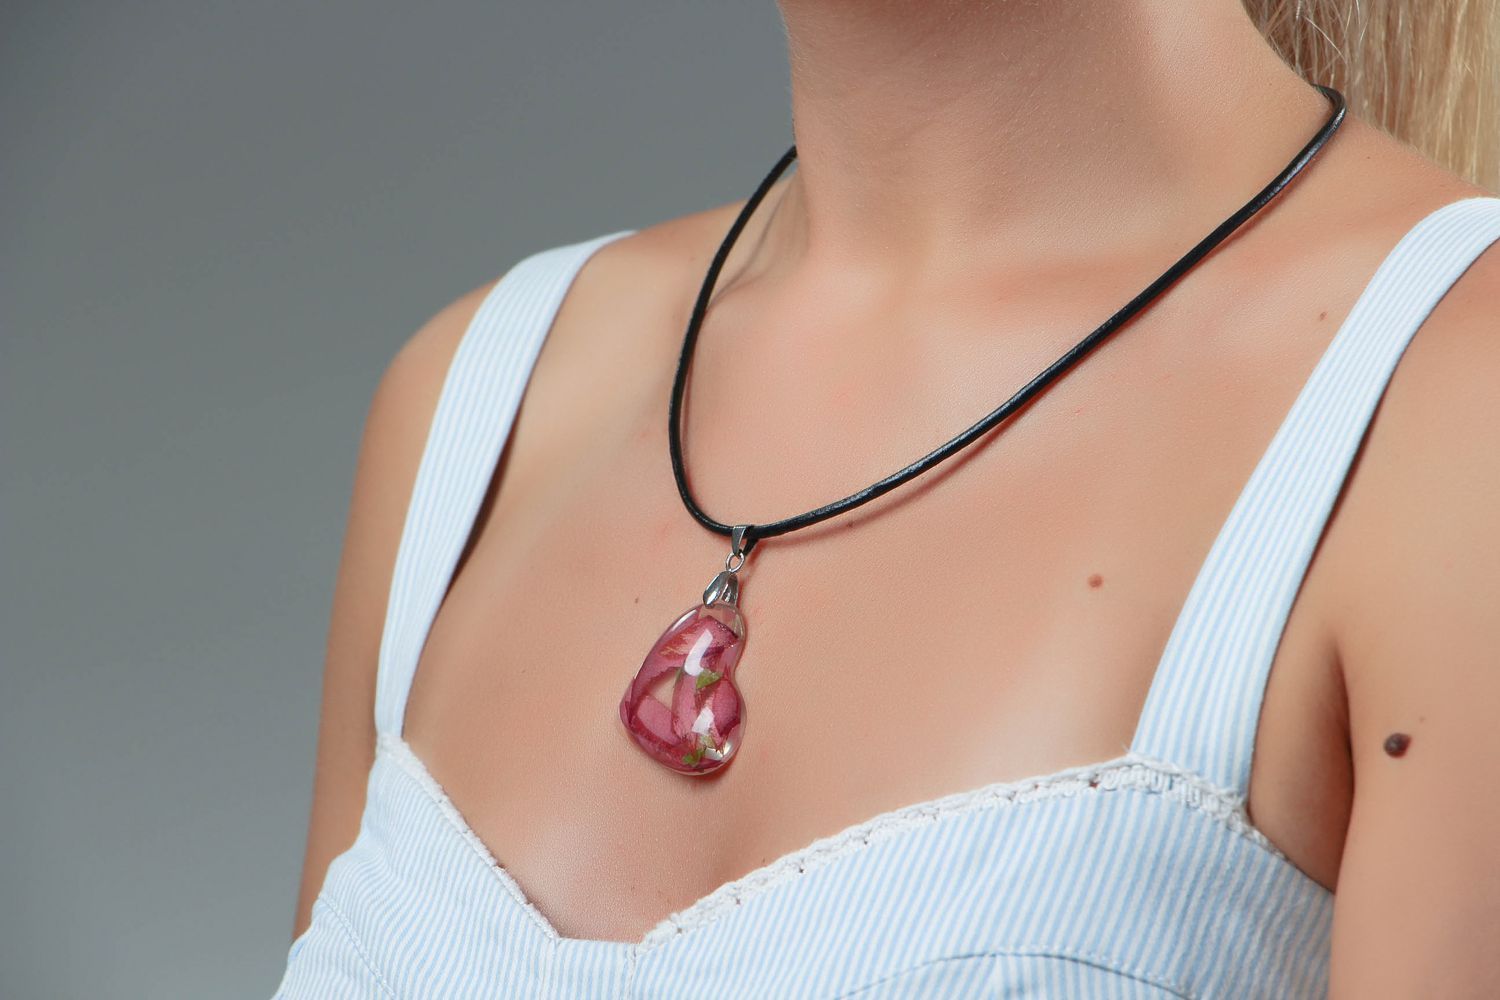 Pendant made from epoxy and rose petals photo 4